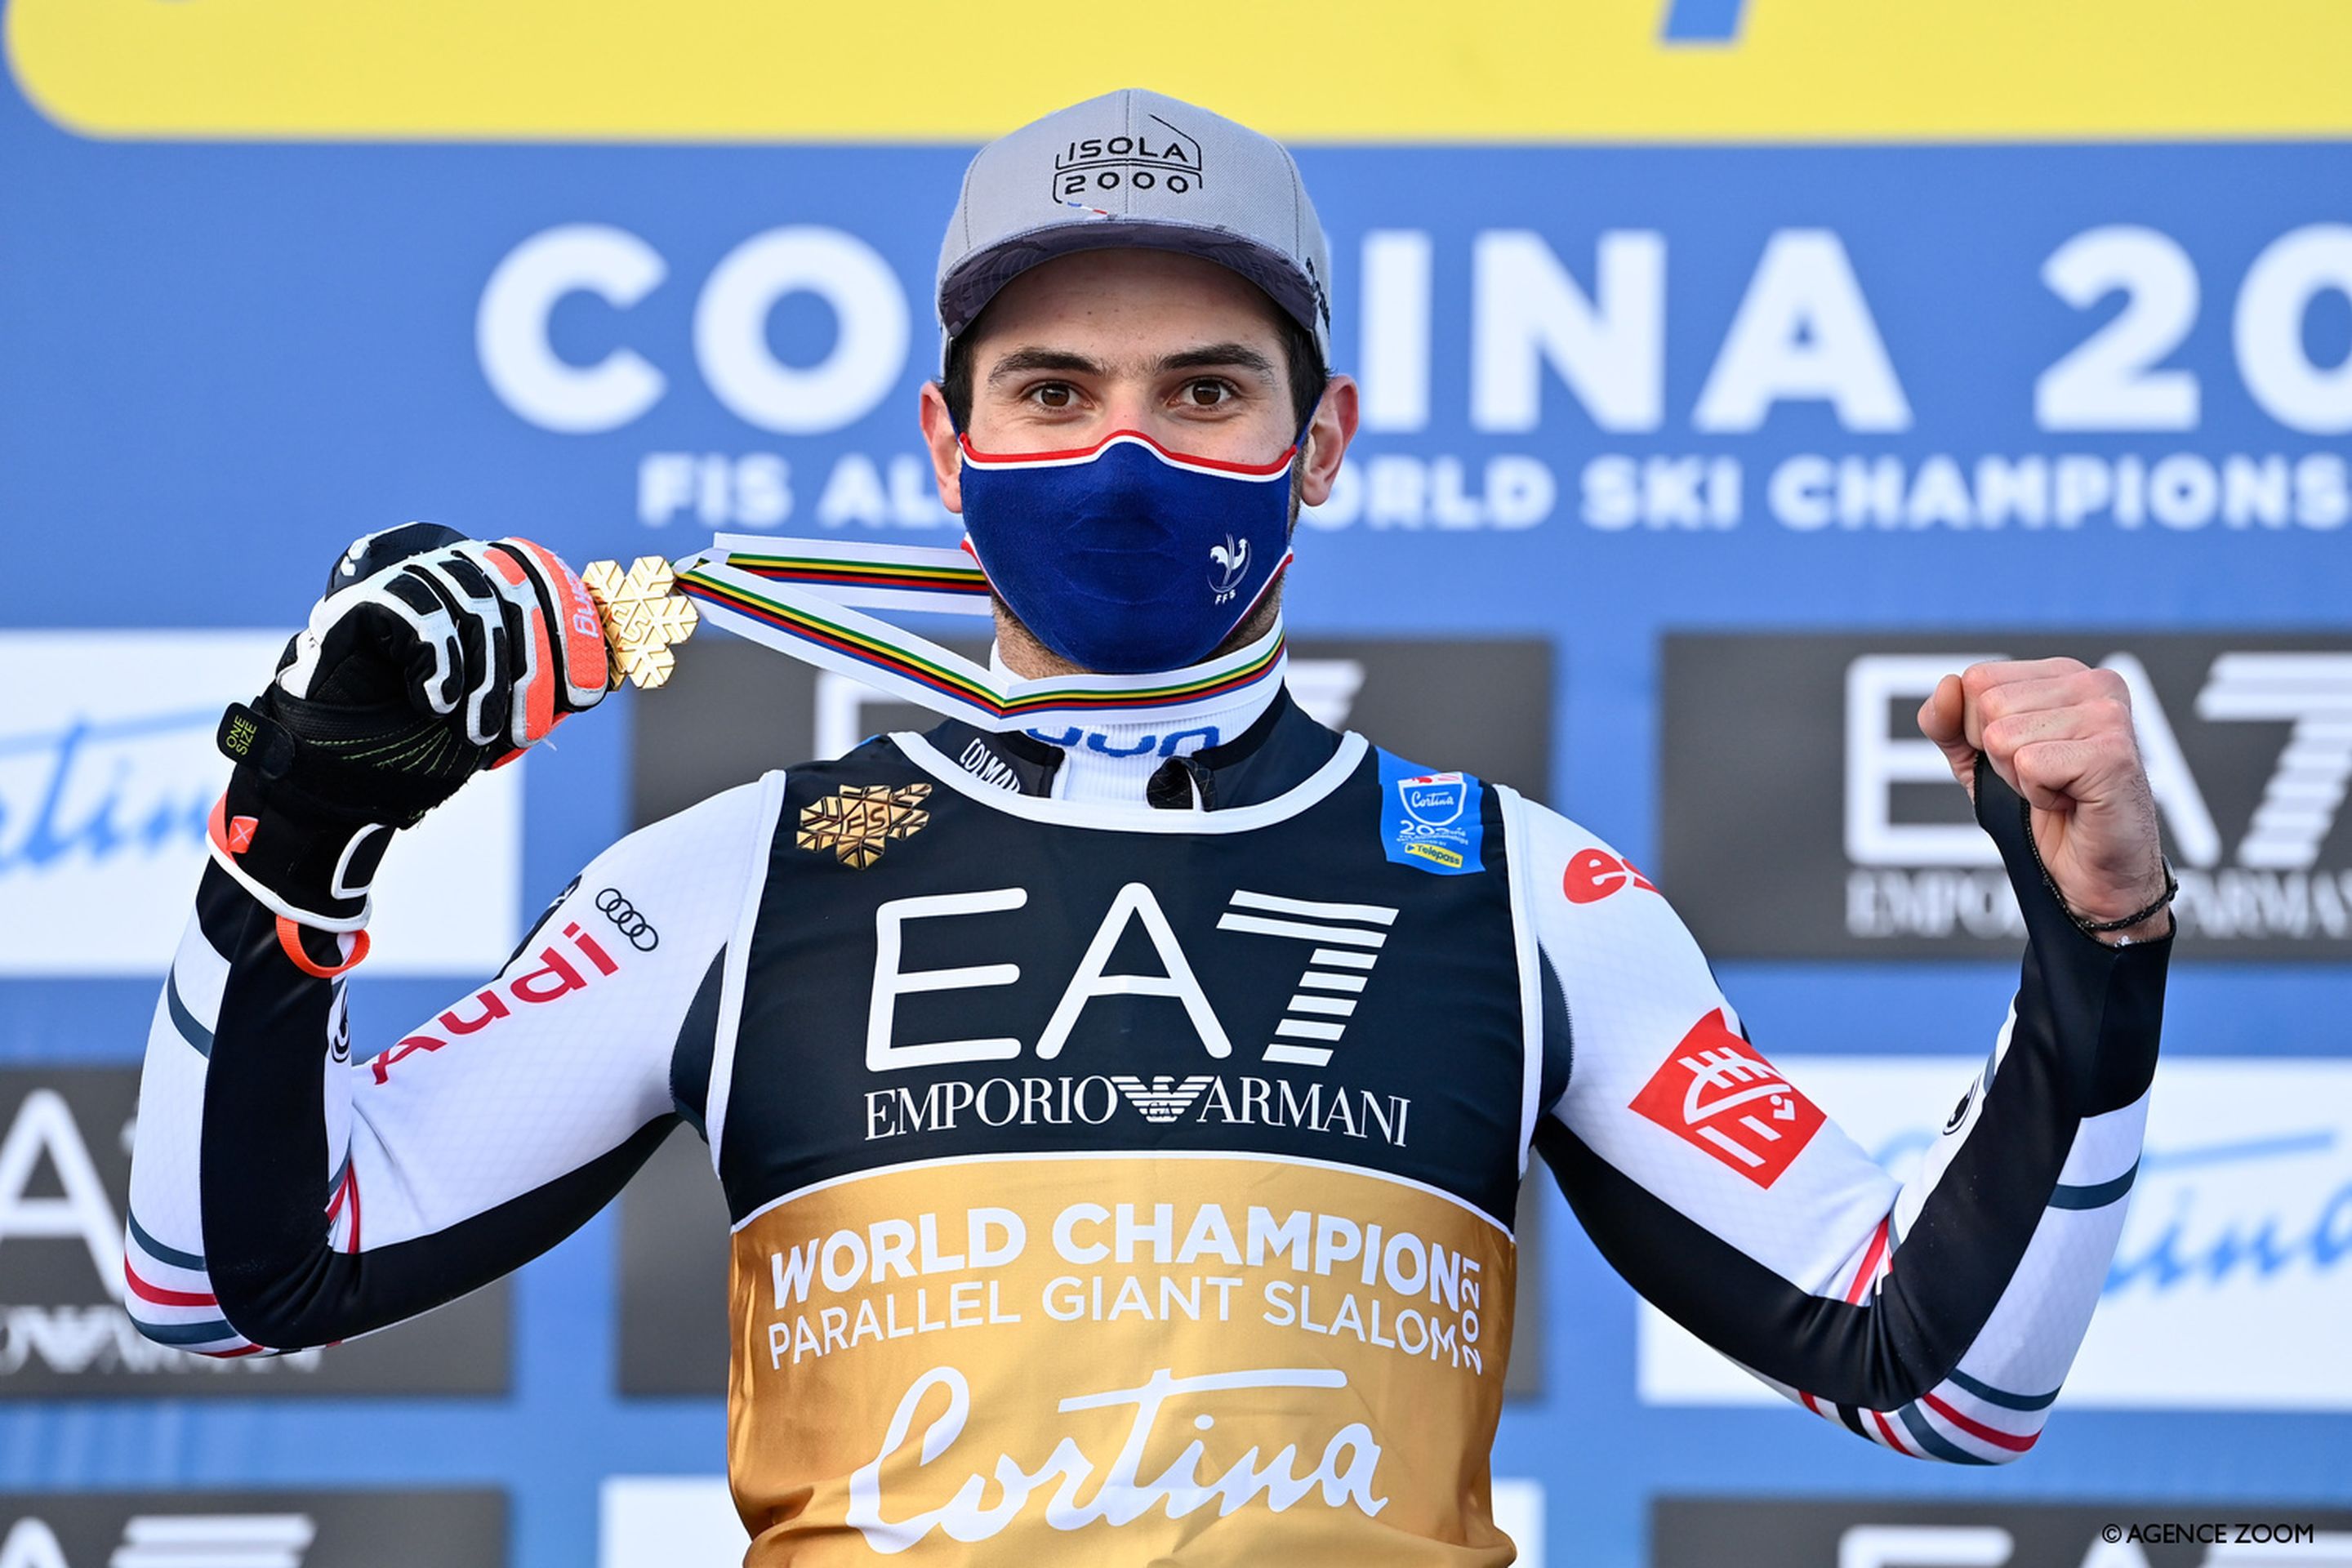 CORTINA D'AMPEZZO, ITALY - FEBRUARY 16 : Mathieu Faivre of France wins the gold medal during the FIS Alpine Ski World Championships Men's & Women's Parallel Giant Slalom on February 16, 2021 in Cortina d'Ampezzo Italy. (Photo by Alain Grosclaude/Agence Zoom)